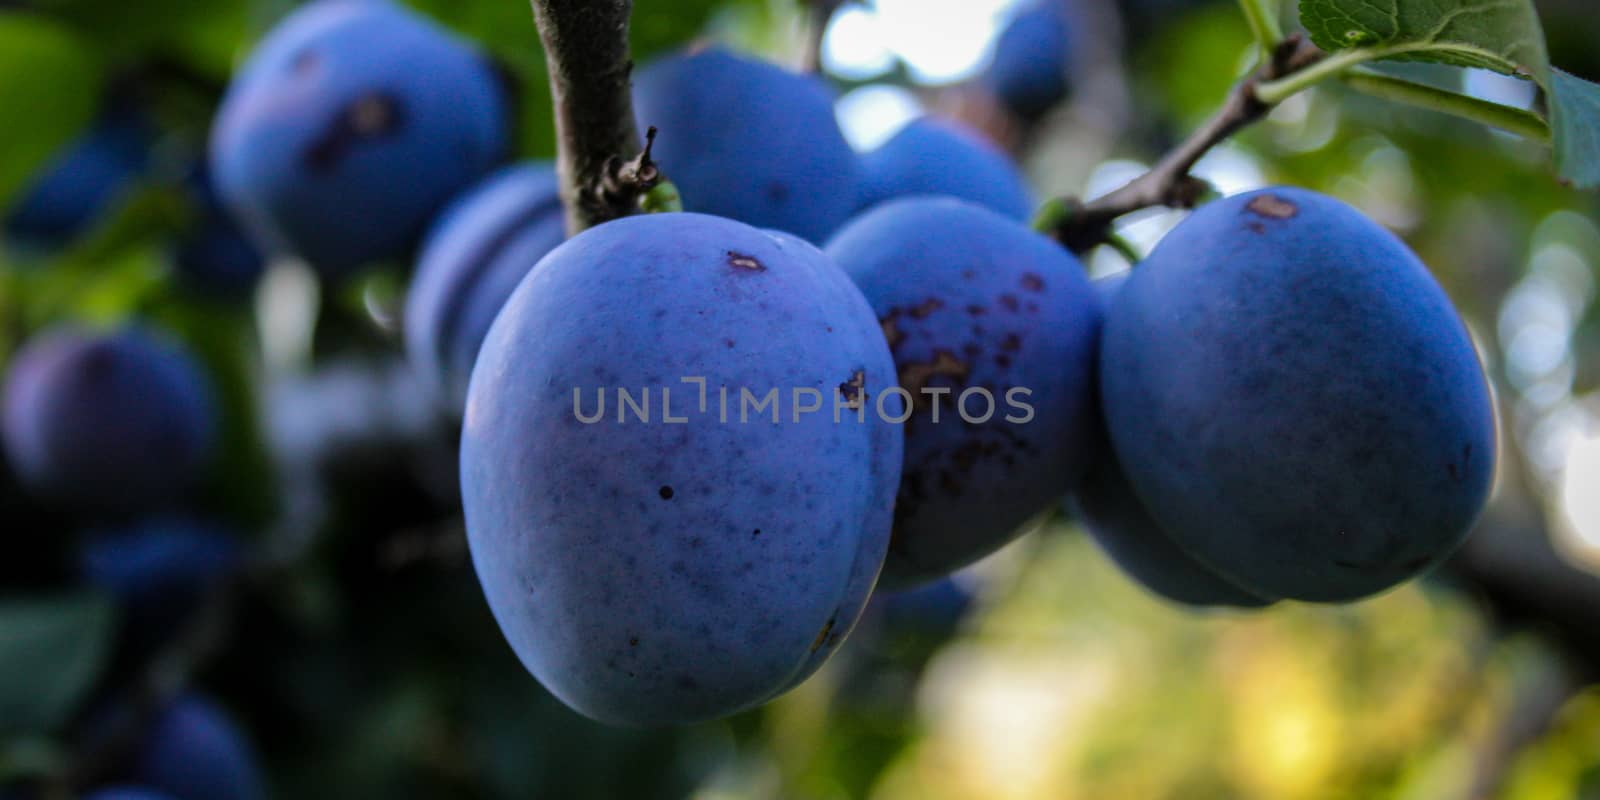 Banner. A group of large round plums on a branch. Plum orchard. Ripe blue plums on a branch. Zavidovići, Bosnia and Herzegovina.